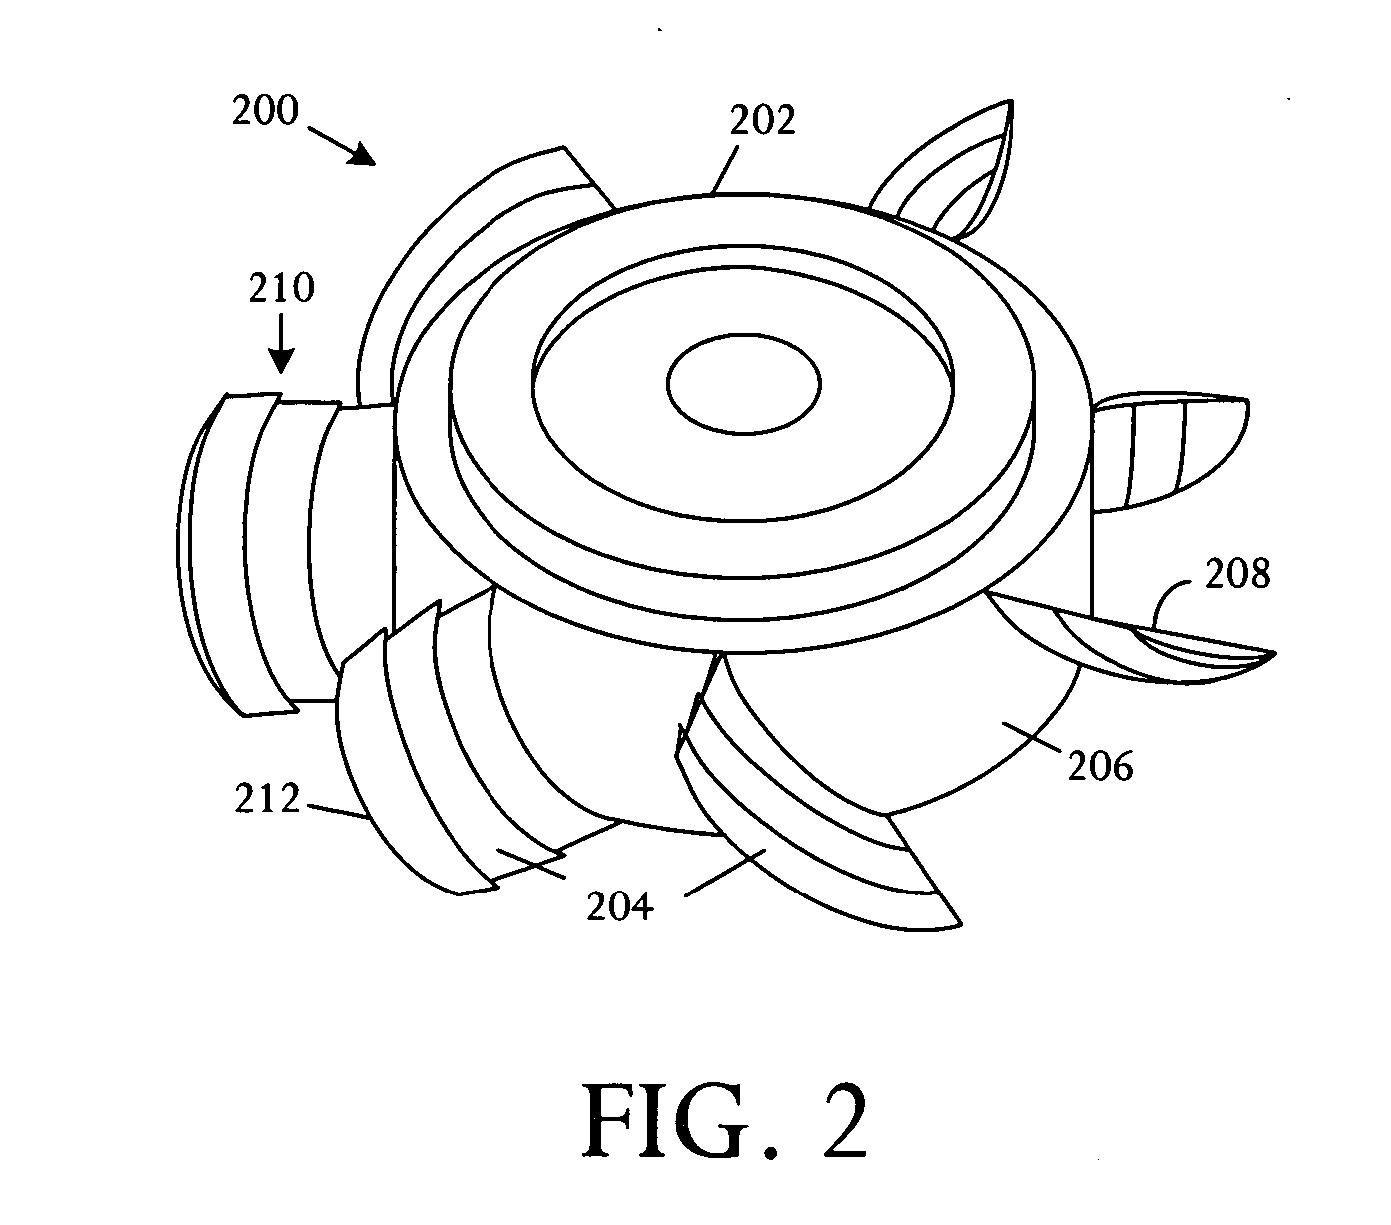 Electronics cooling fan with collapsible fan blade